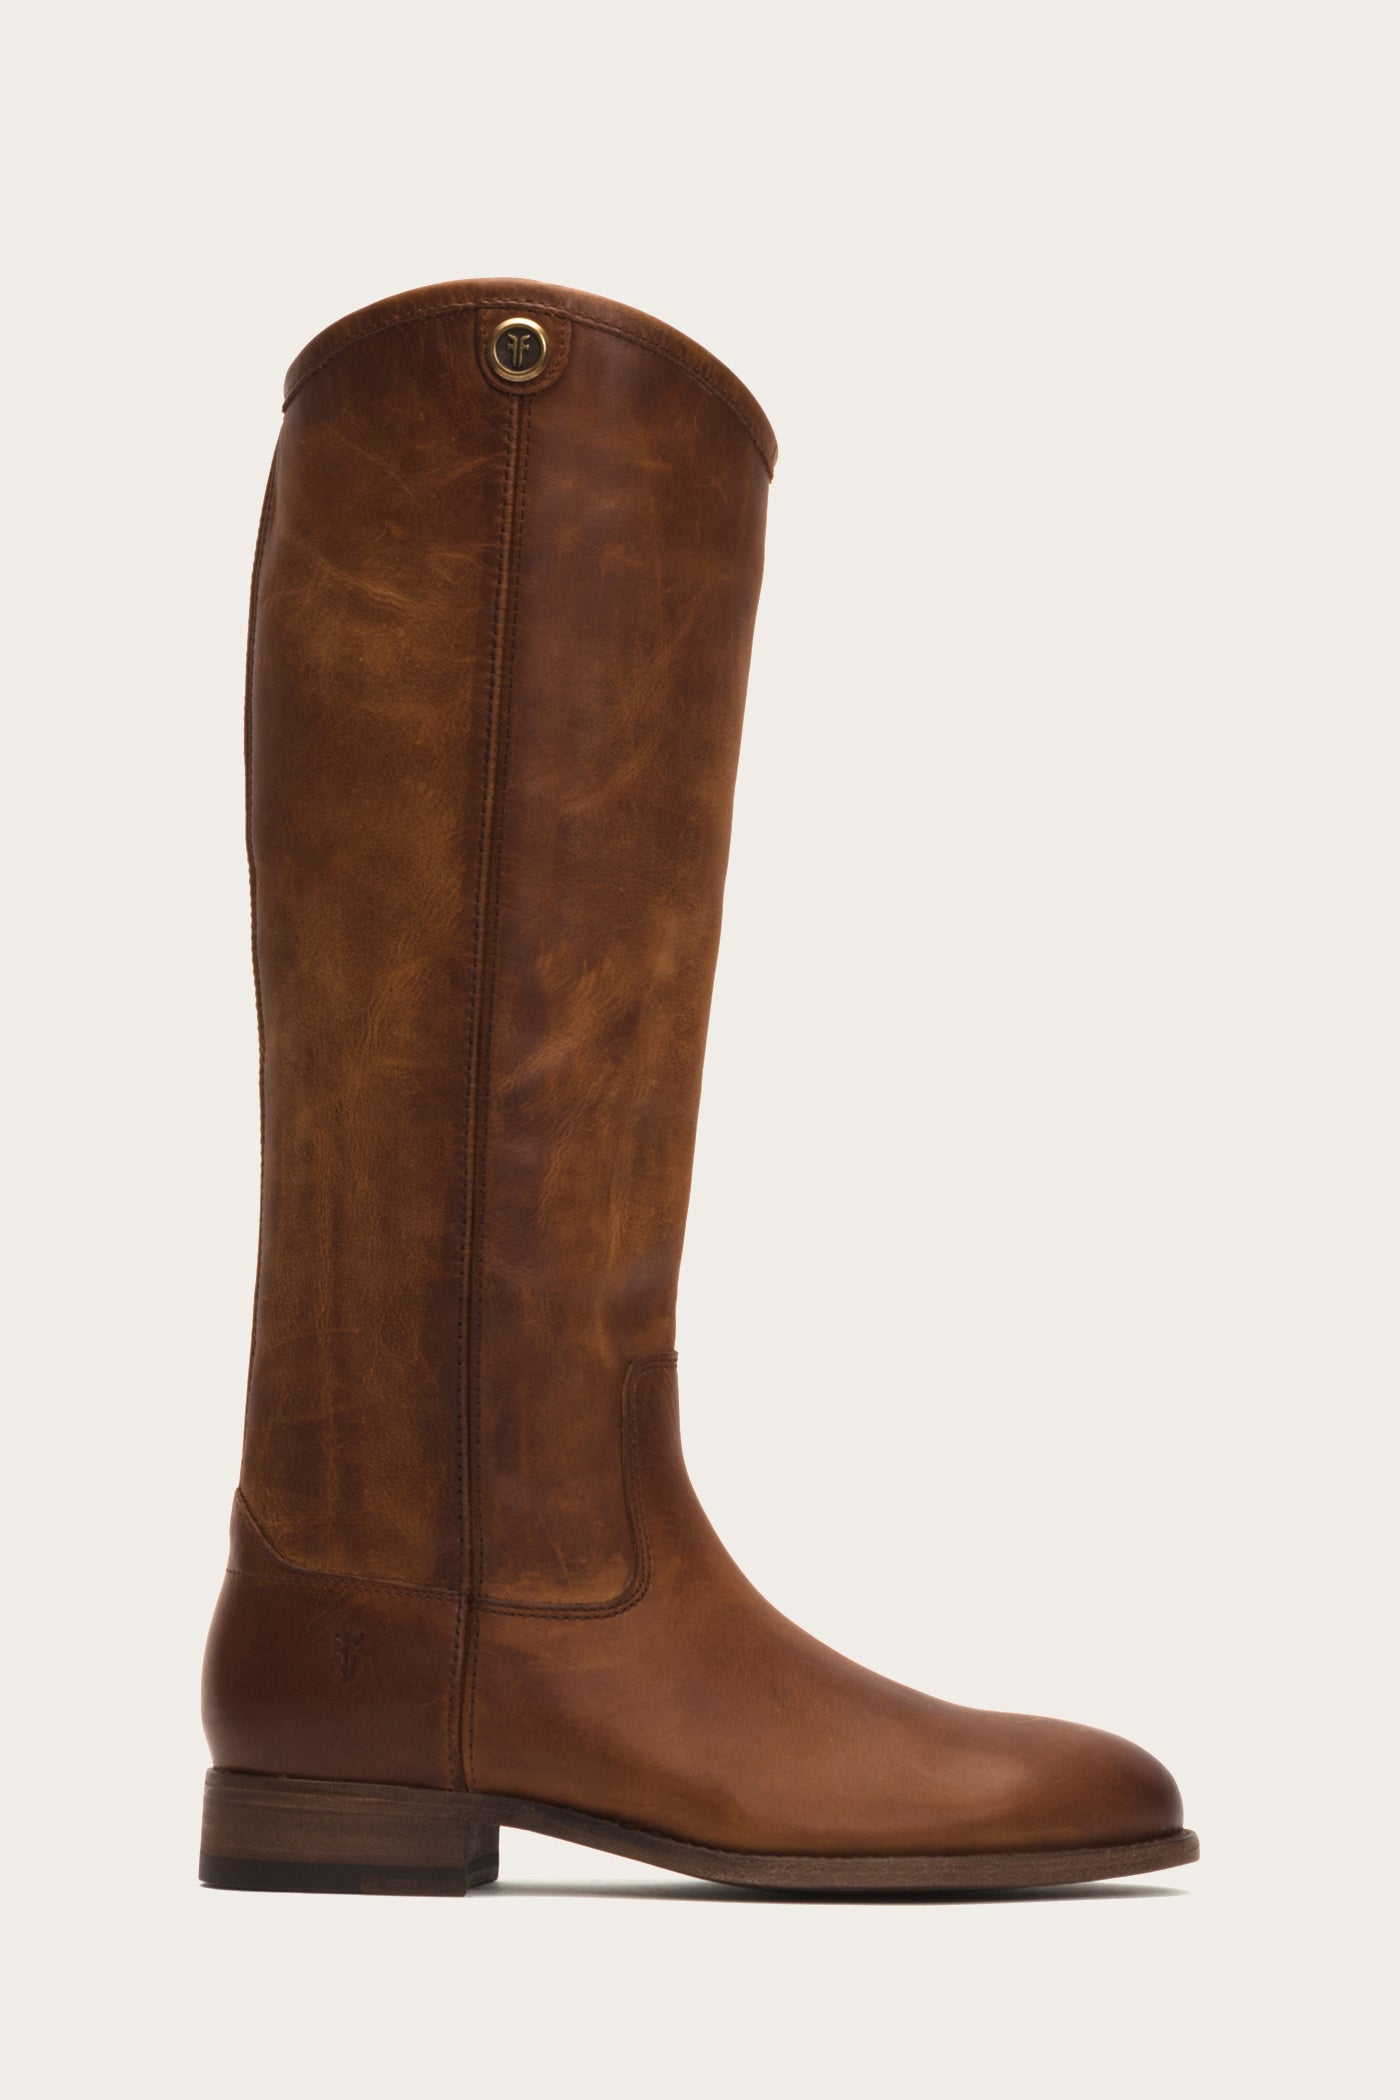 2 inch circumference wide calf boots